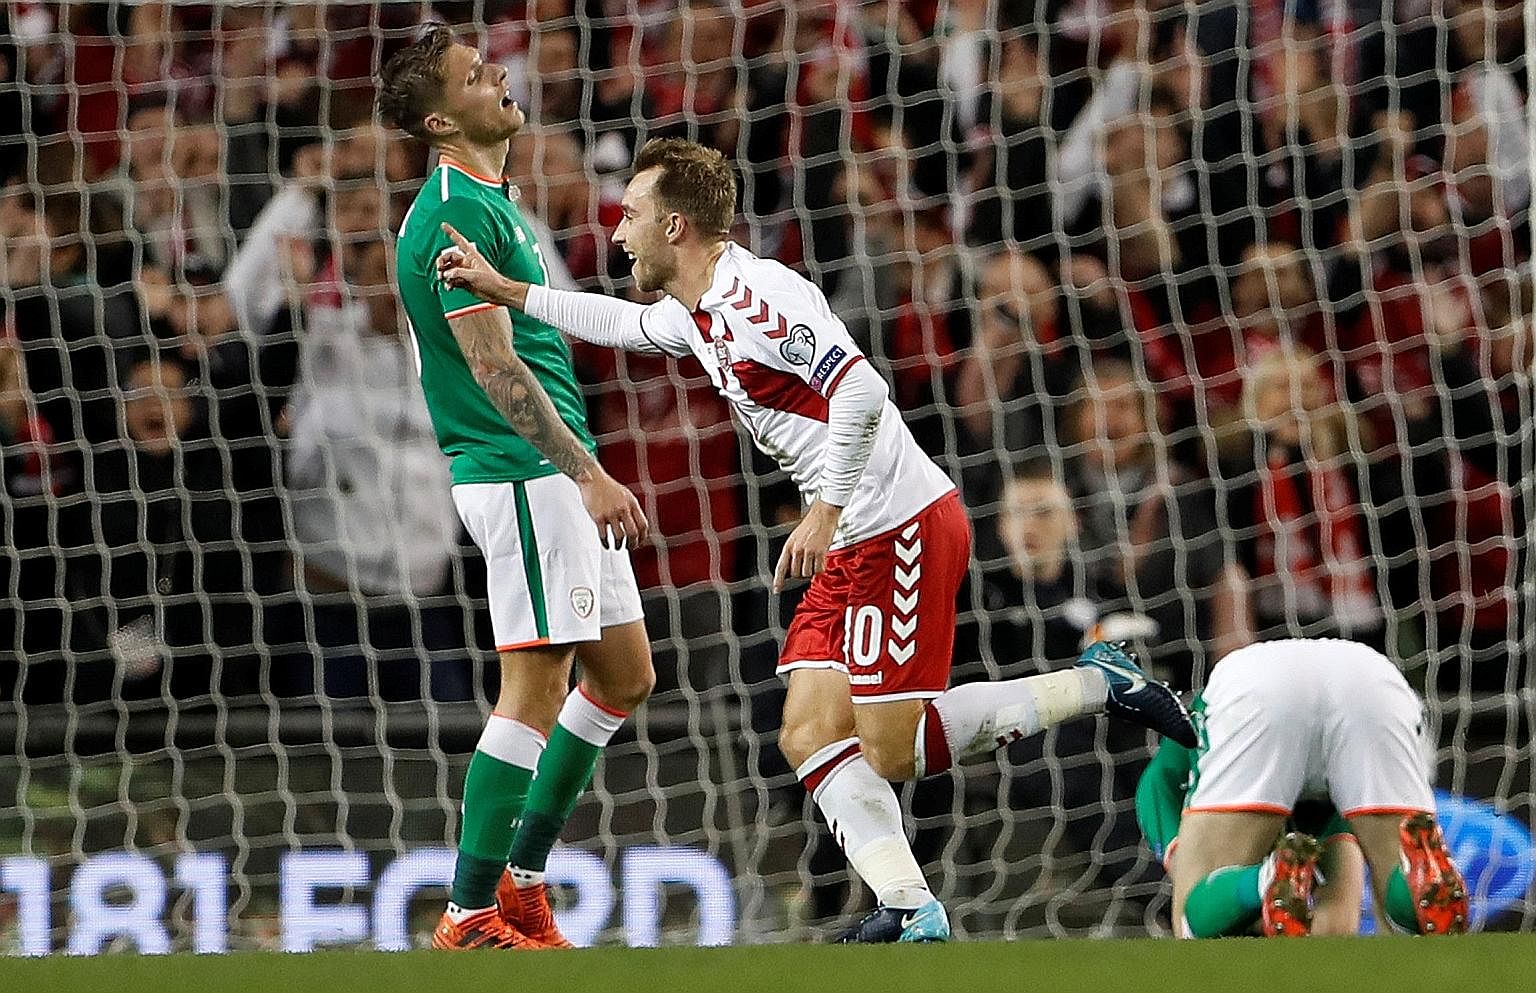 Denmark's delight is the Republic of Ireland's despair, as Christian Eriksen celebrates scoring their fourth goal to complete his hat-trick in the Danes' 5-1 victory in the World Cup play-off on Tuesday.